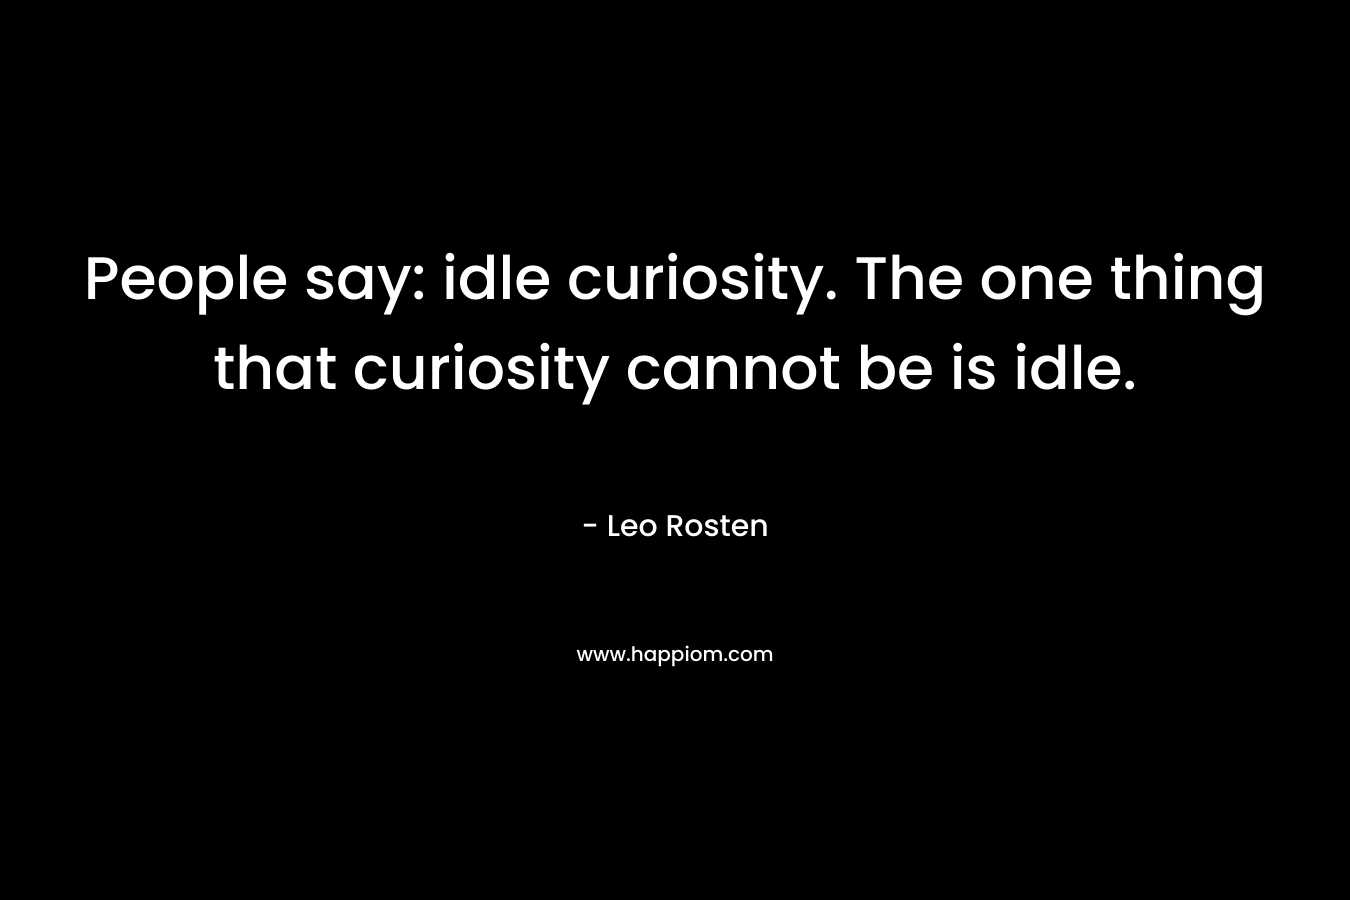 People say: idle curiosity. The one thing that curiosity cannot be is idle.